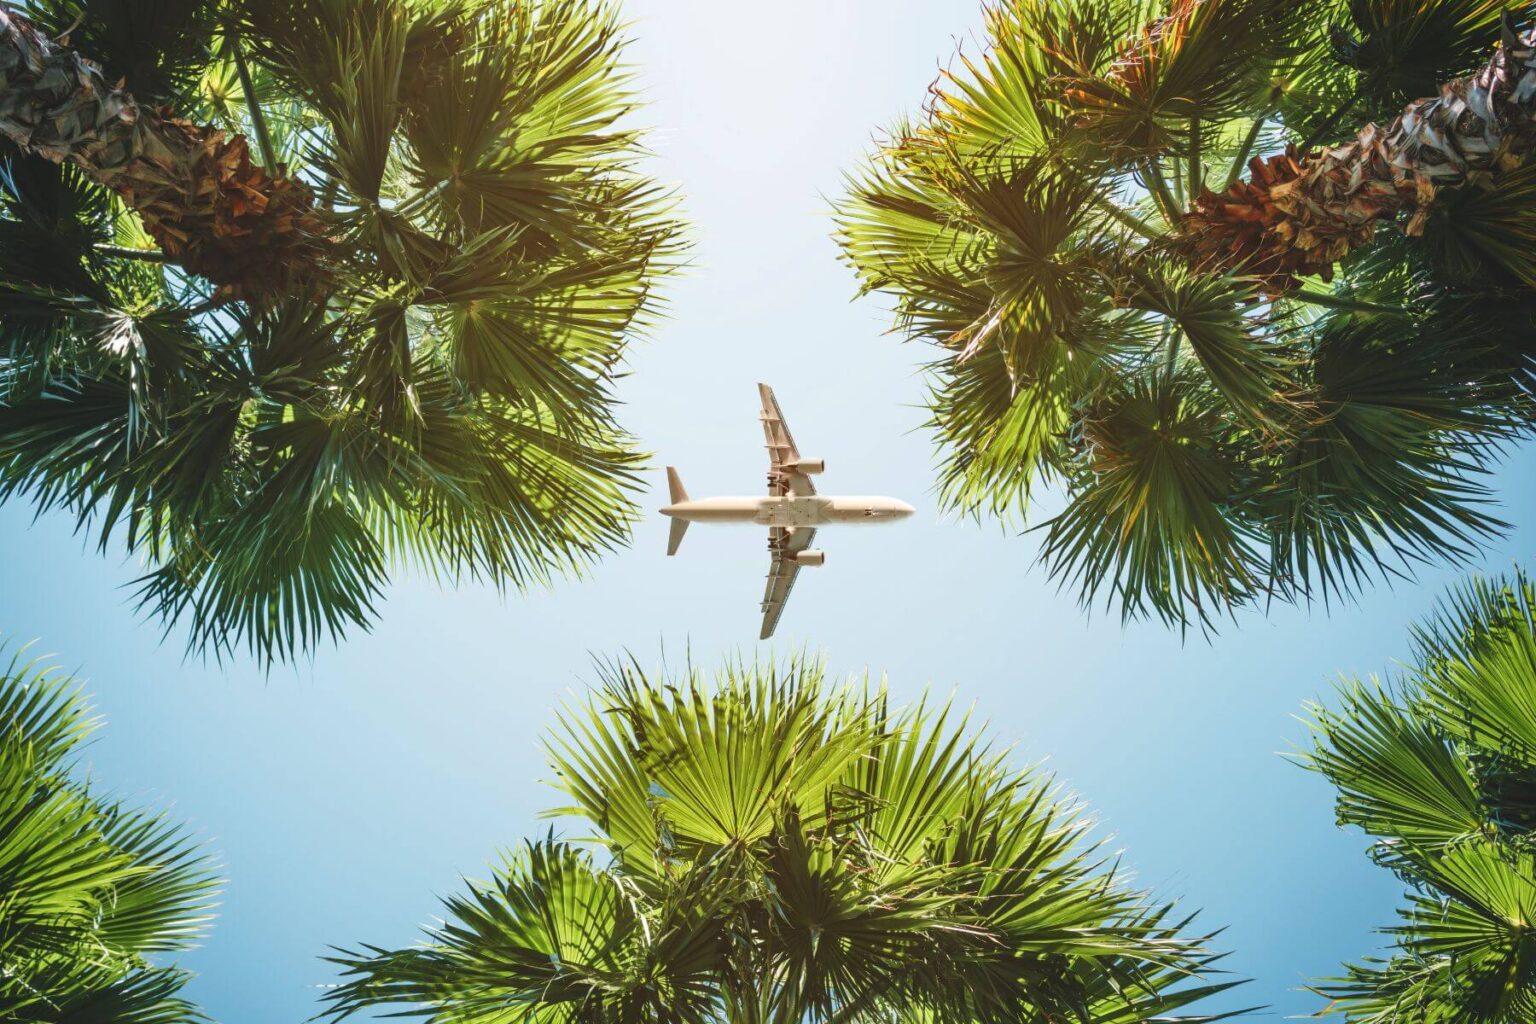 plane flying over several palm trees in South Carolina